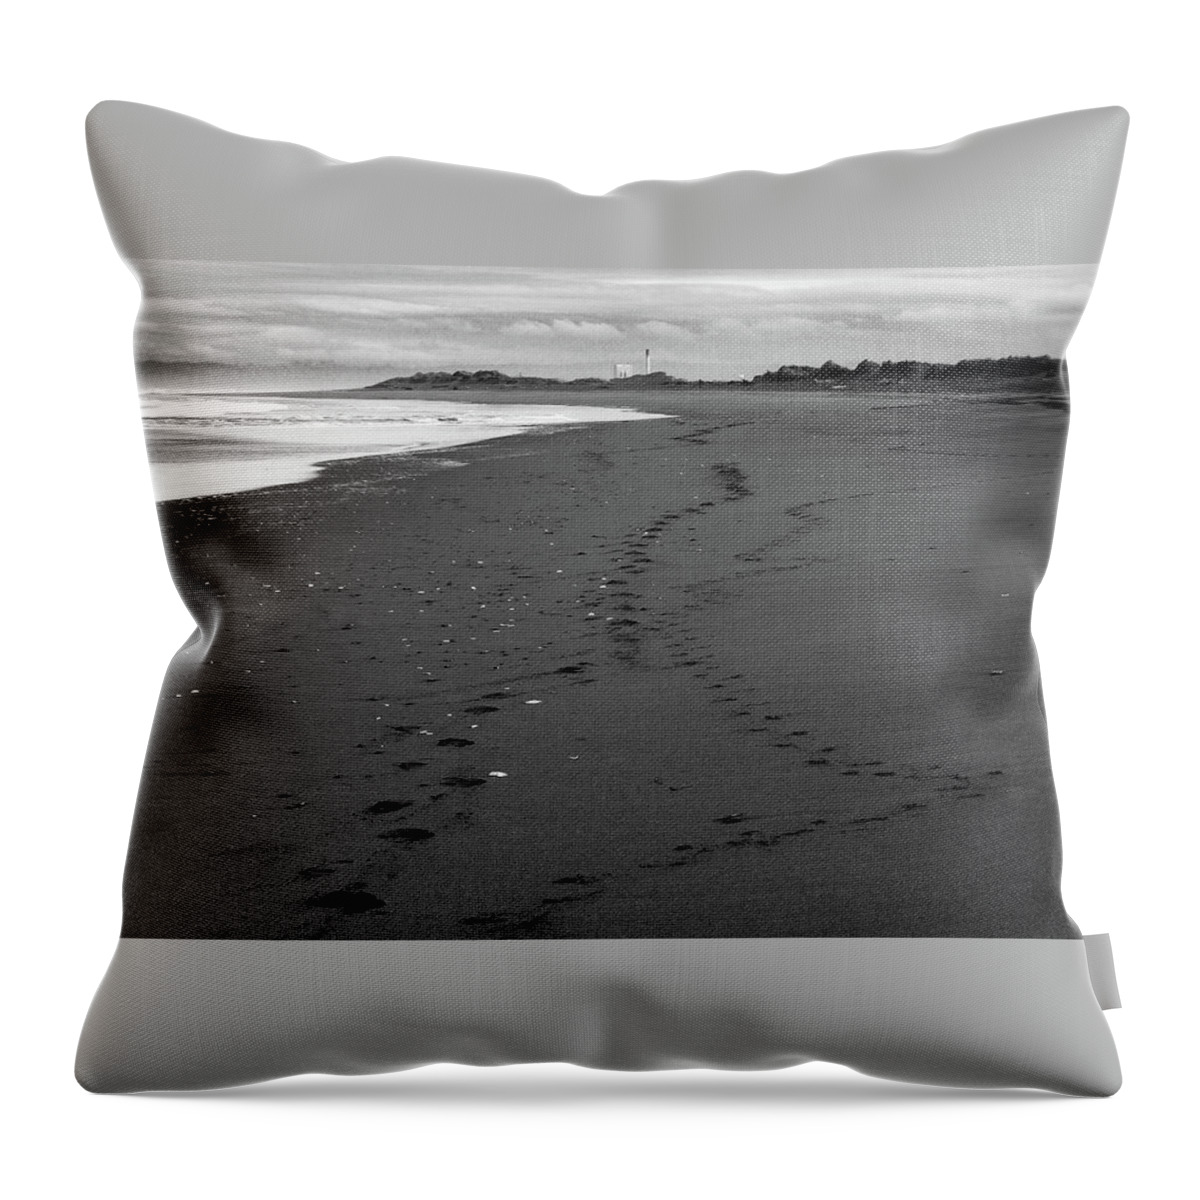  Throw Pillow featuring the photograph Footprints #1 by Dr Janine Williams